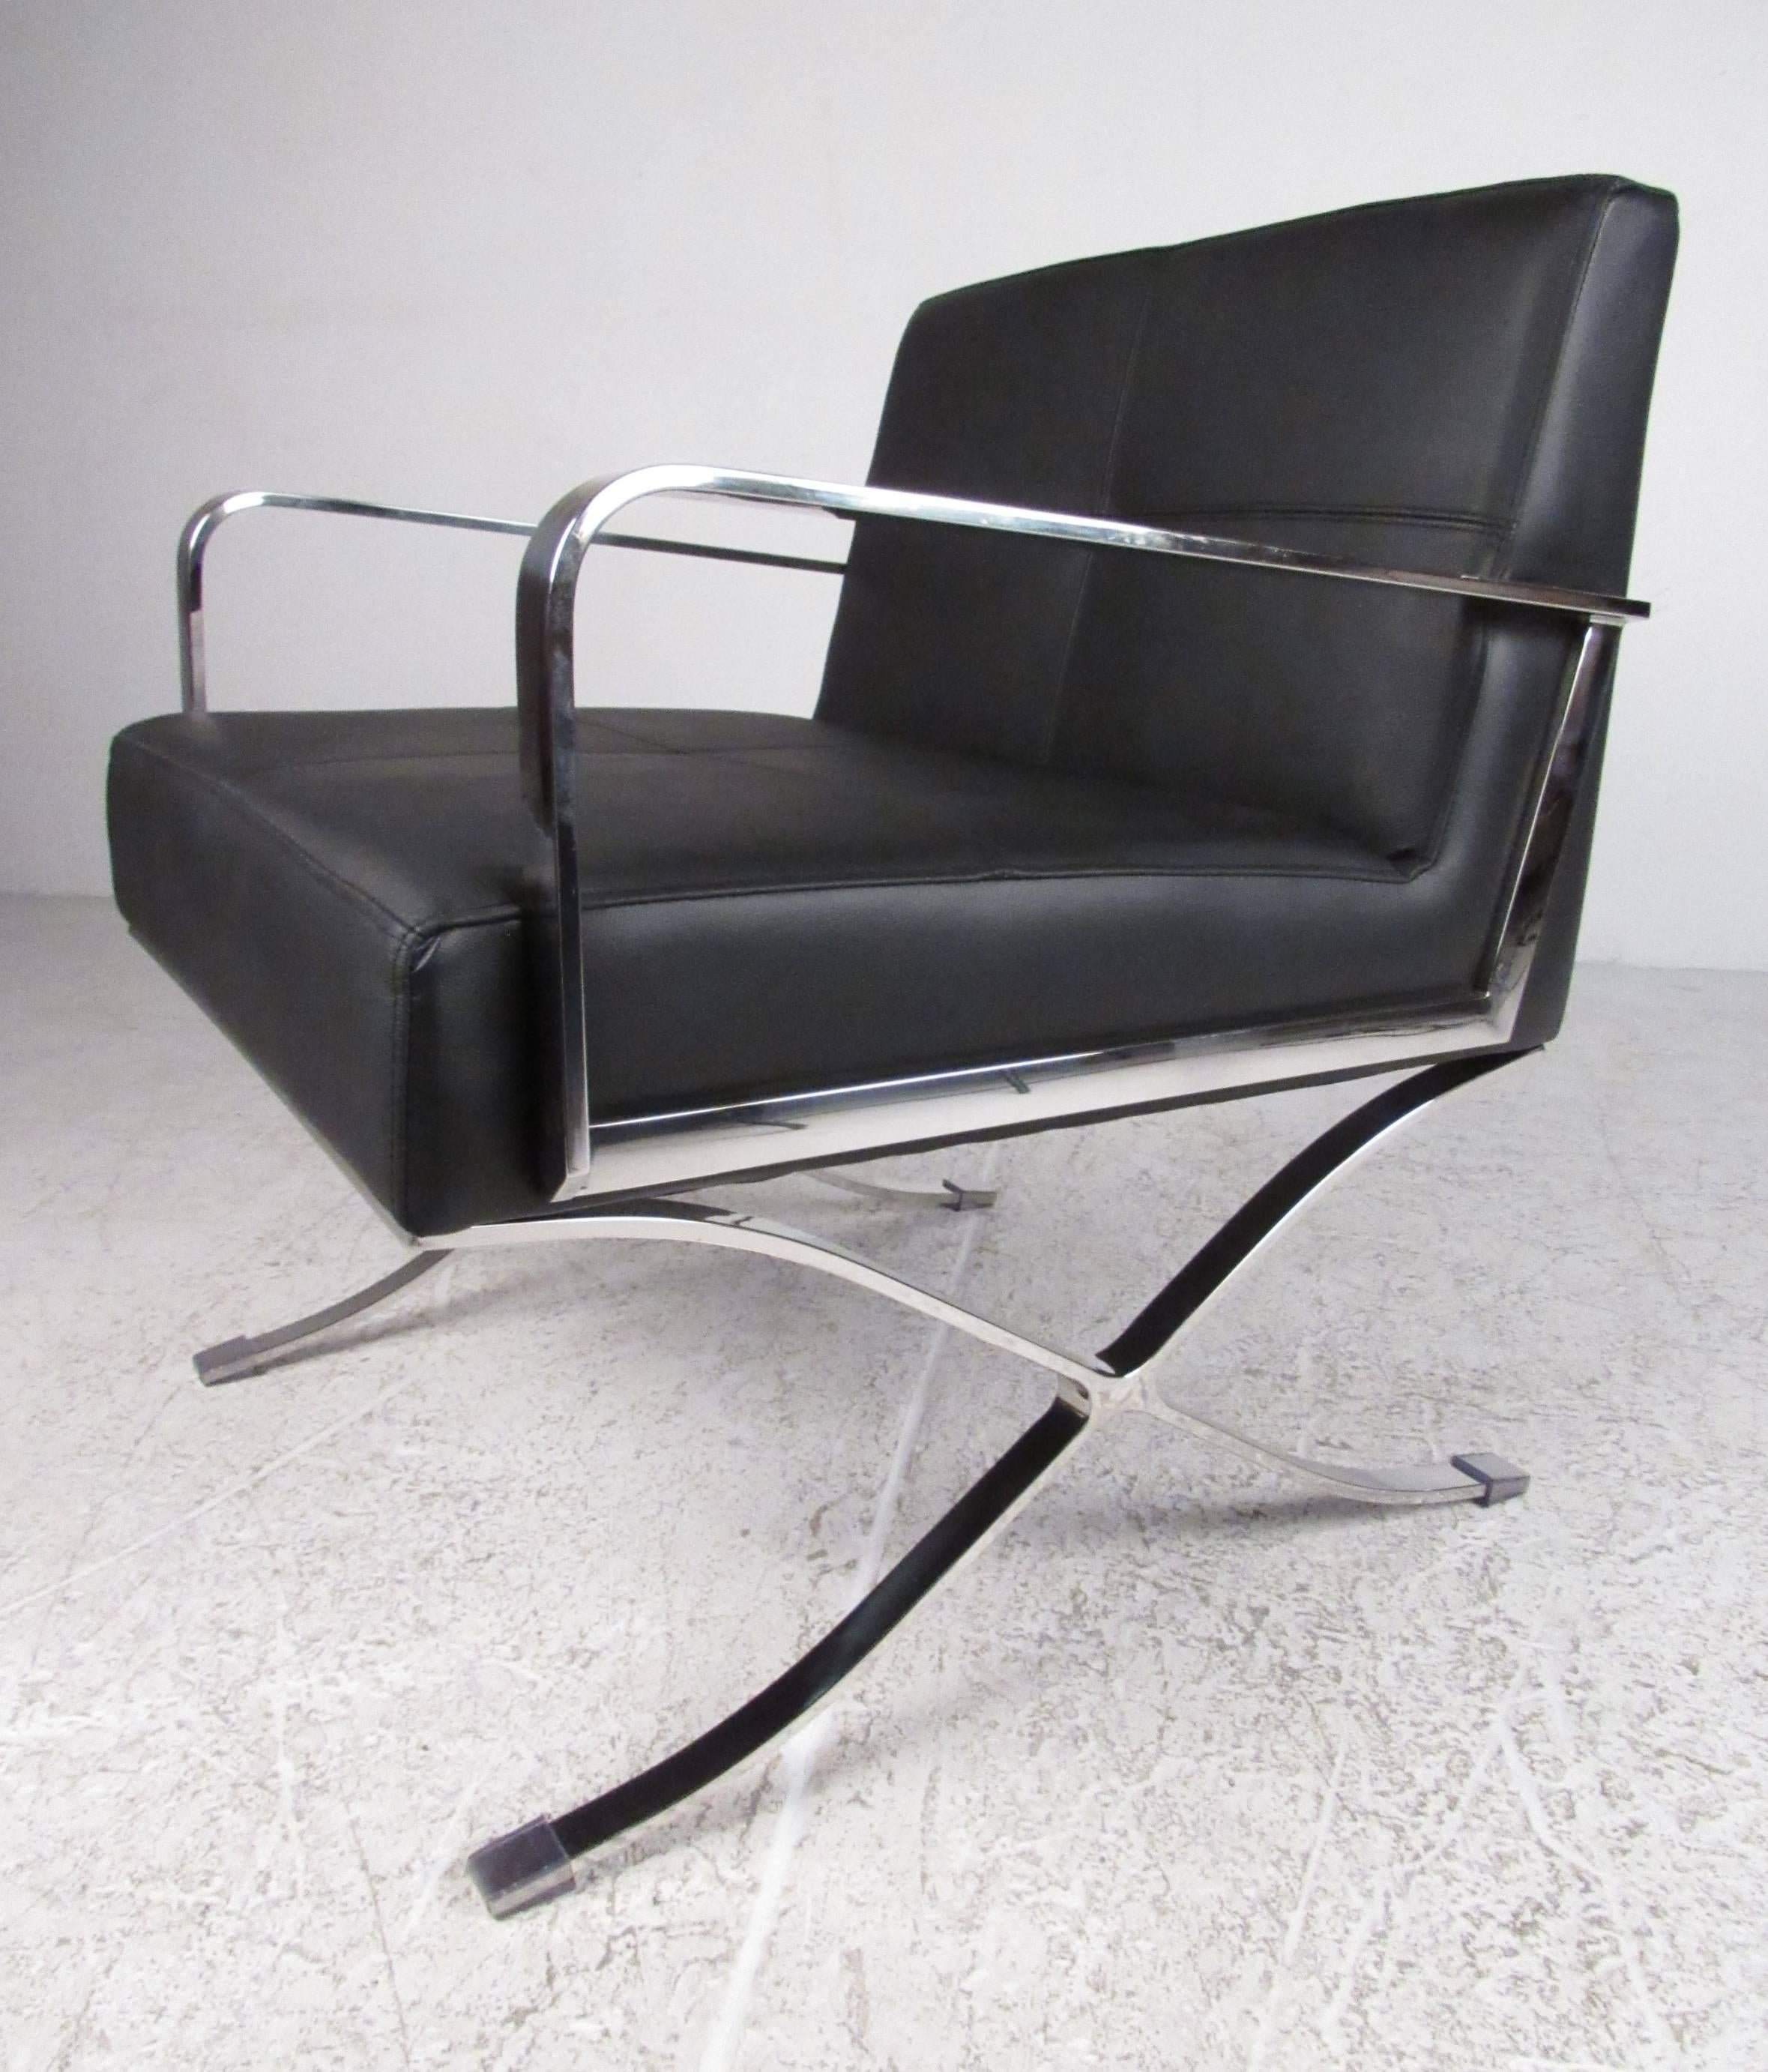 American Pair of Modern Chrome and Vinyl Lounge Chairs